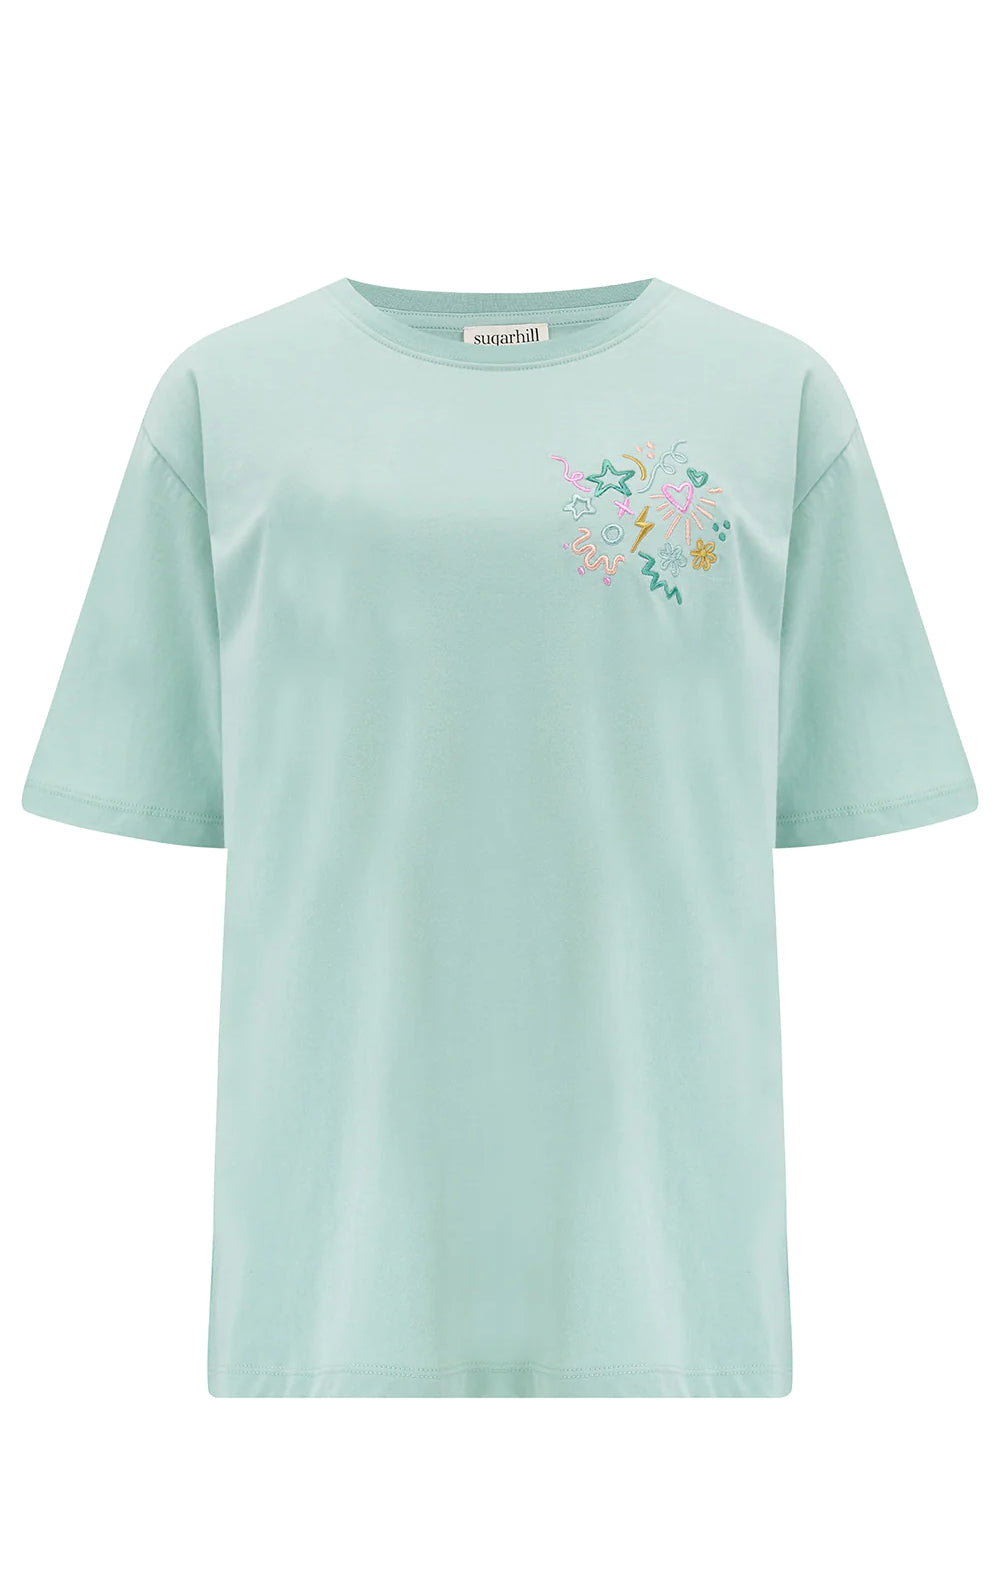 Kinsley Relaxed T-shirt Light Green Doodle Embroidery